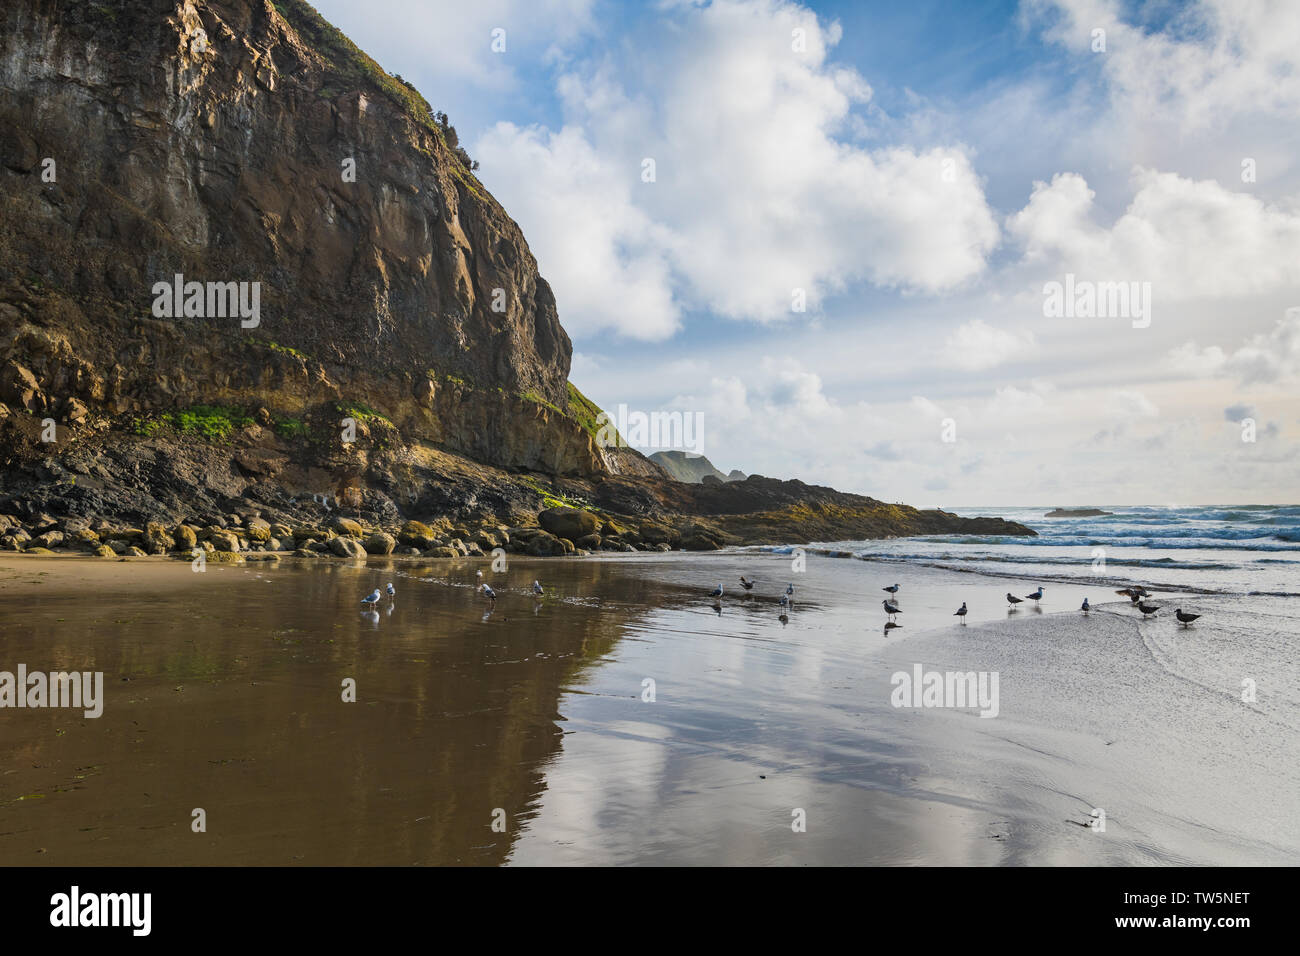 High, rugged cliffs, seagulls, blue sky, and puffy white clouds reflected in the wet sands of a beach along the Oregon coast Stock Photo